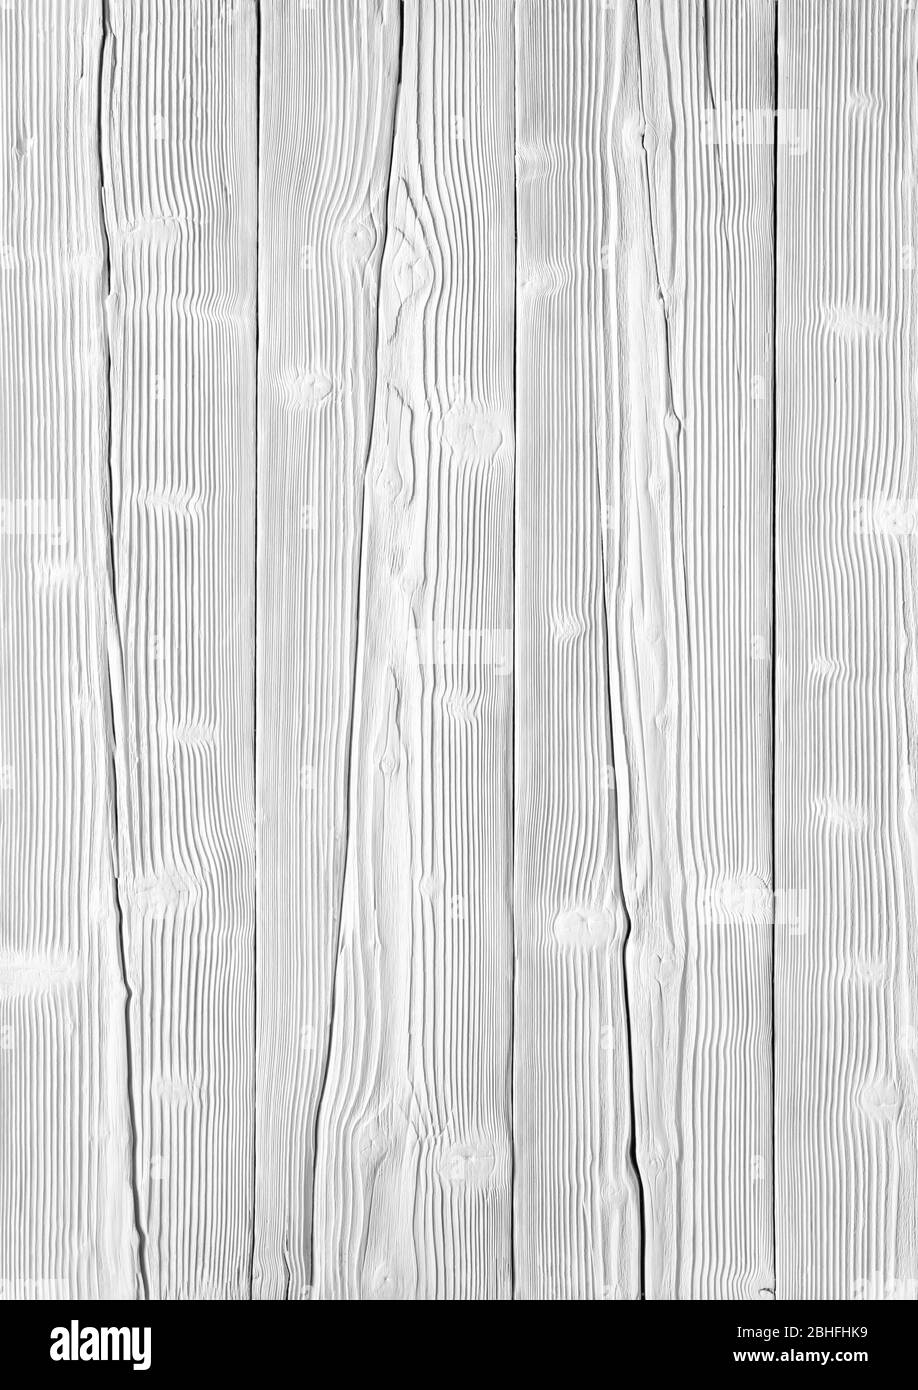 Old wood panel board painted in white. White wood textured background. Stock Photo